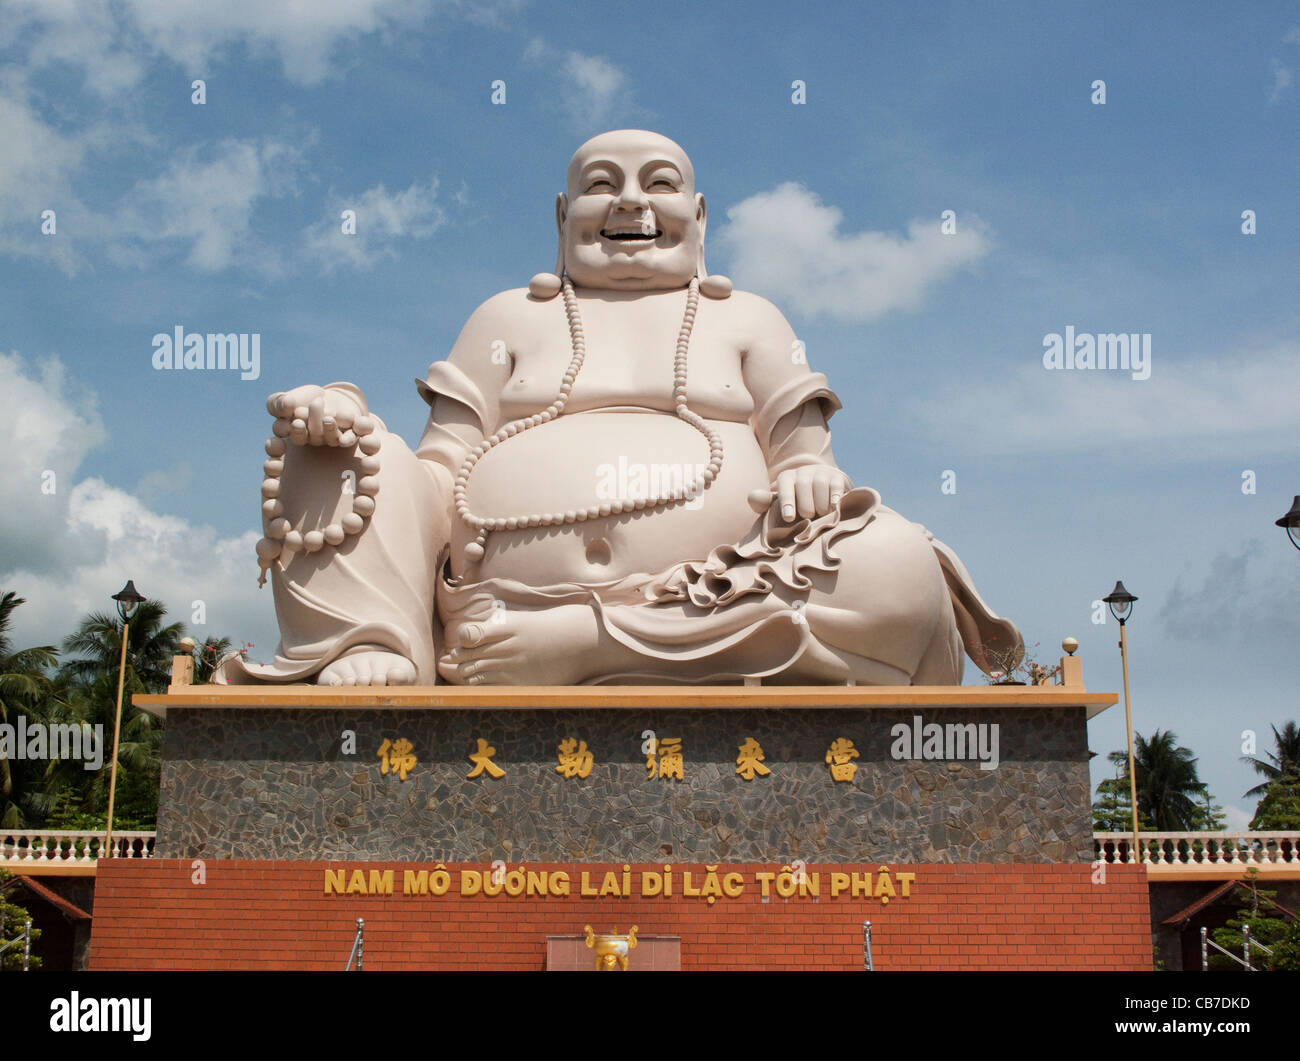 Large Buddha at Nam Mo Duong Lai Di Lac Ton Phat Buddhist temple in Hue, Vietnam Stock Photo